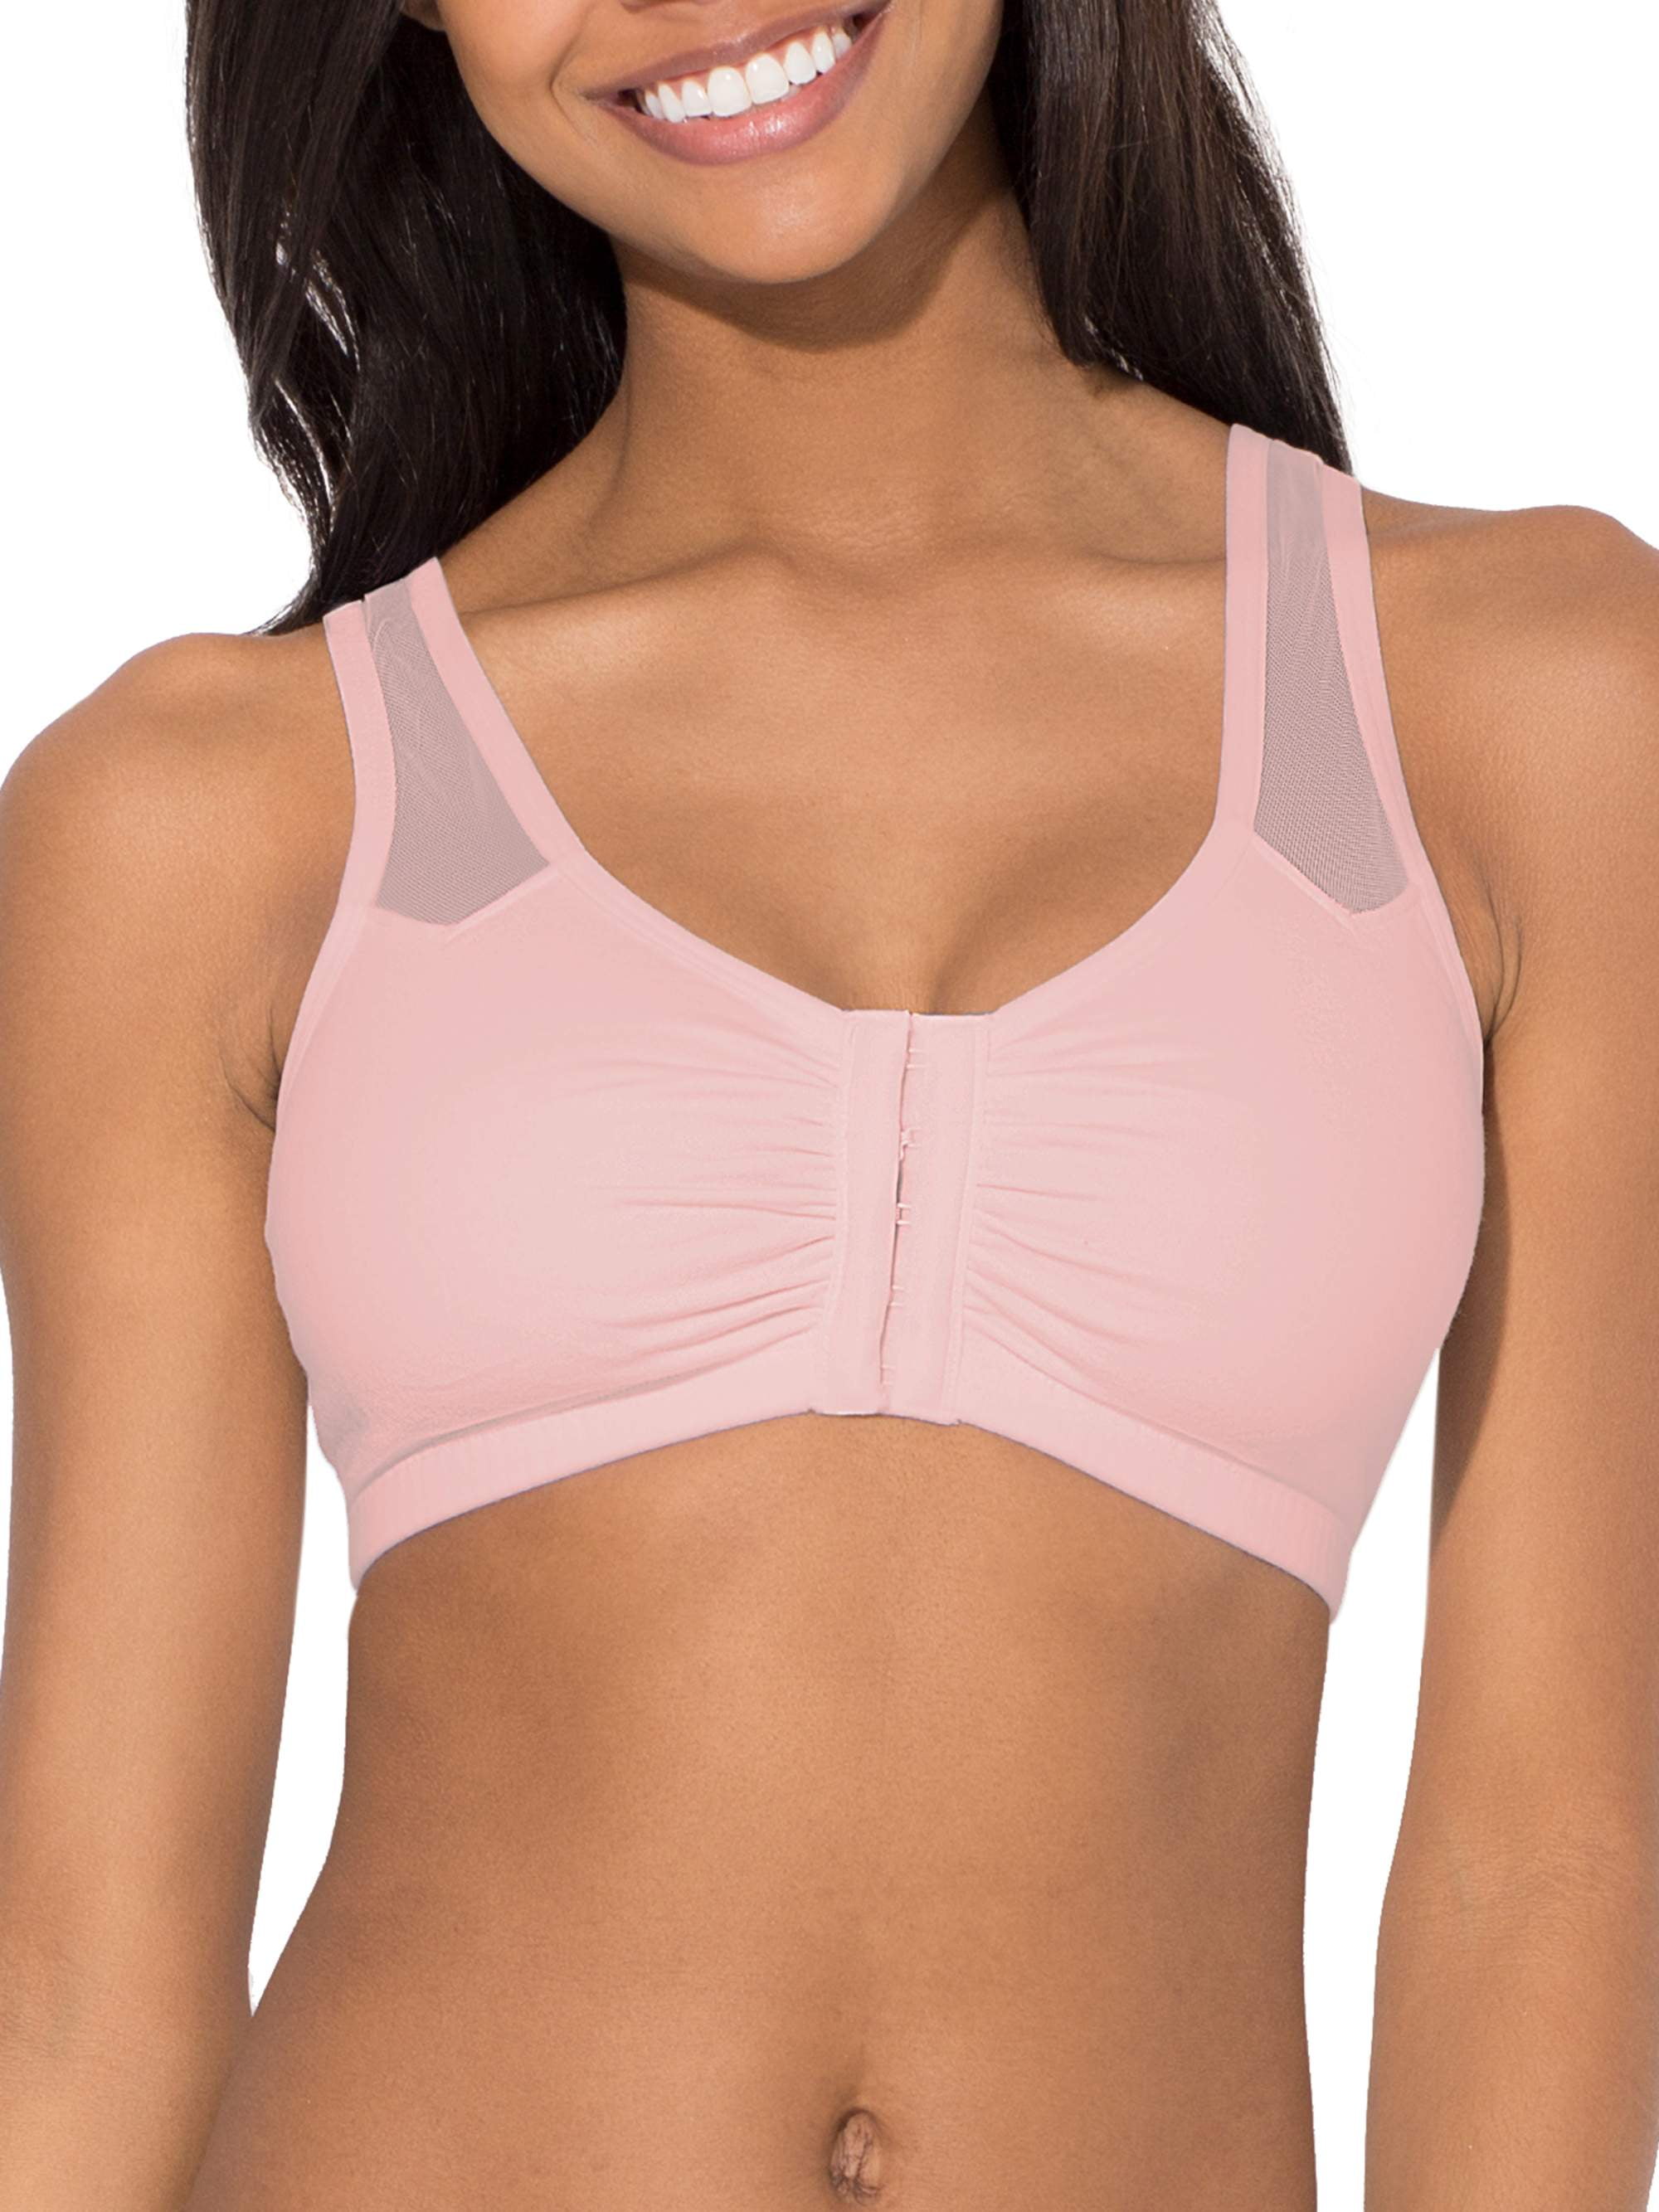 Fruit Of The Loom Women's Beyond Soft Front Closure Cotton Bra 3